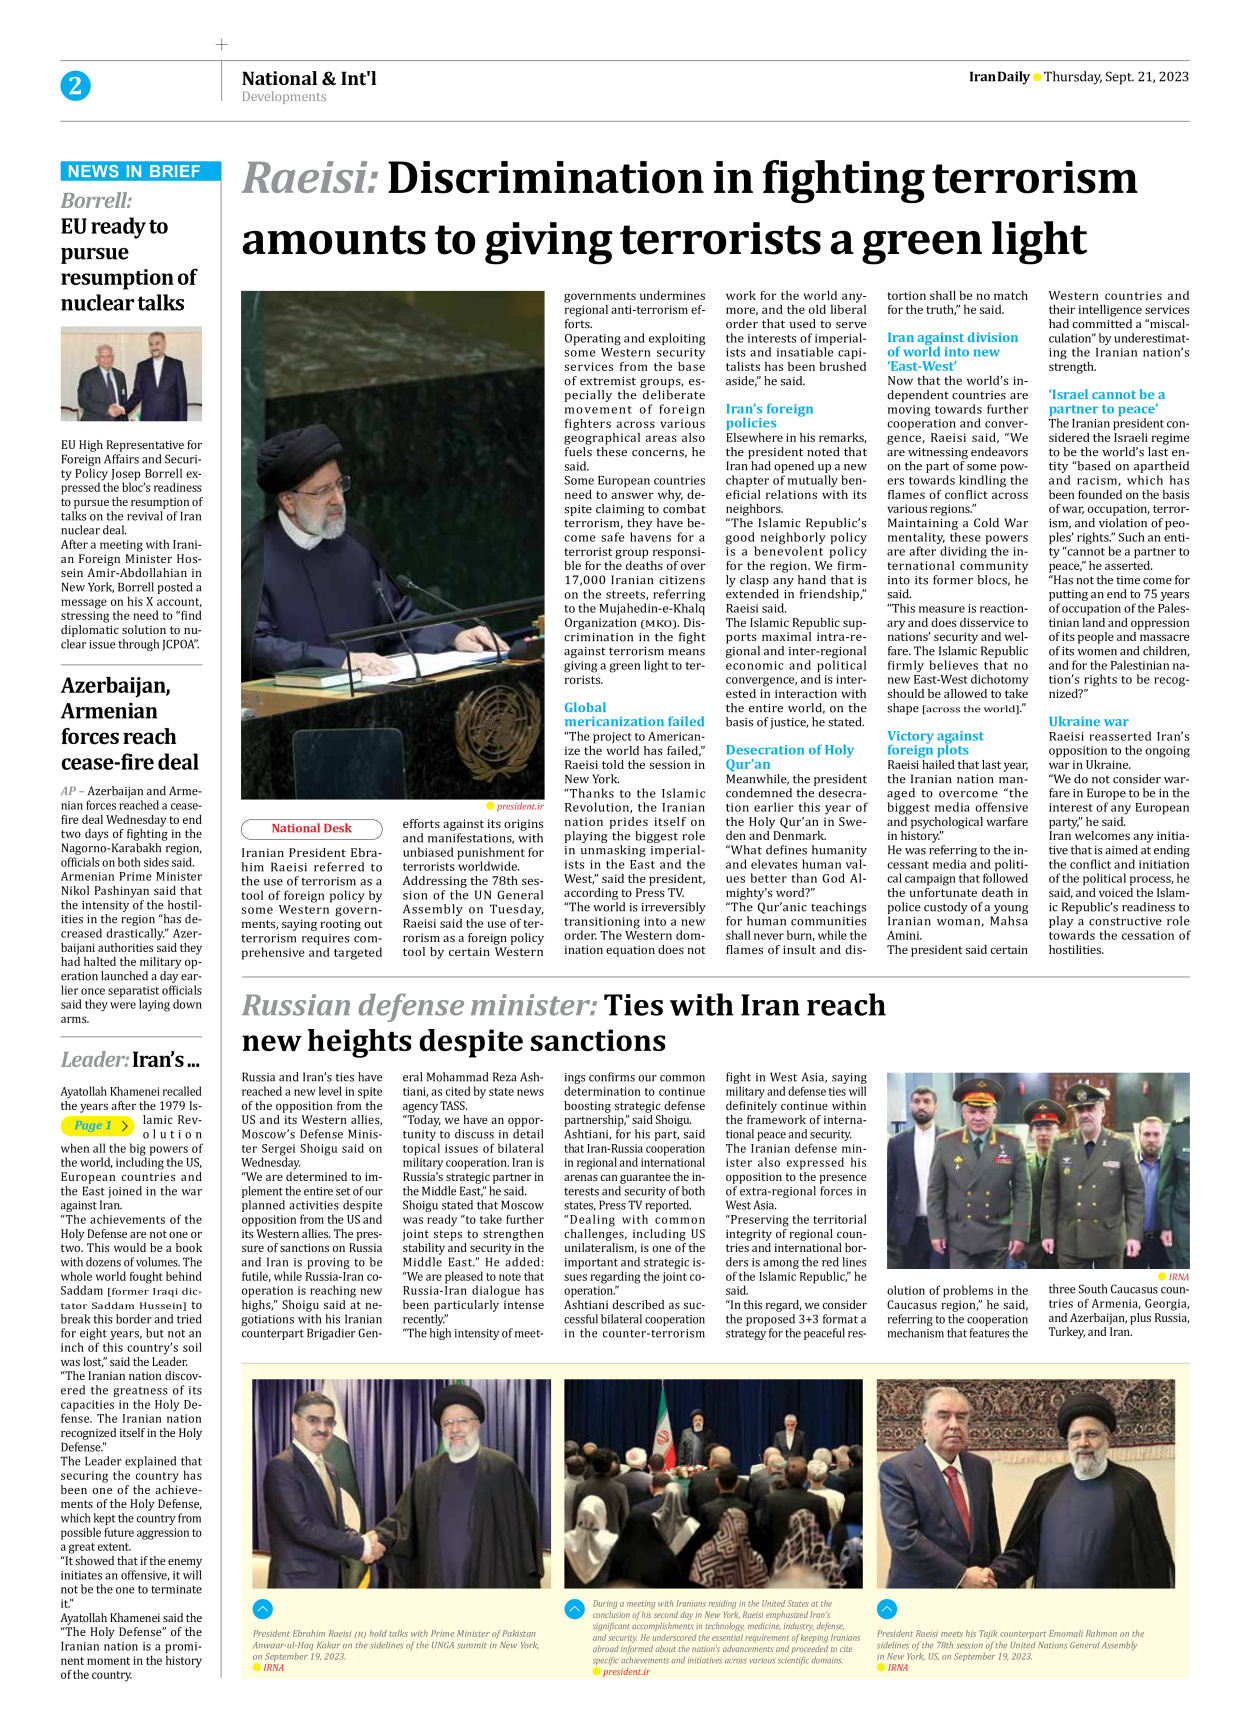 Iran Daily - Number Seven Thousand Three Hundred and Ninety One - 21 September 2023 - Page 2